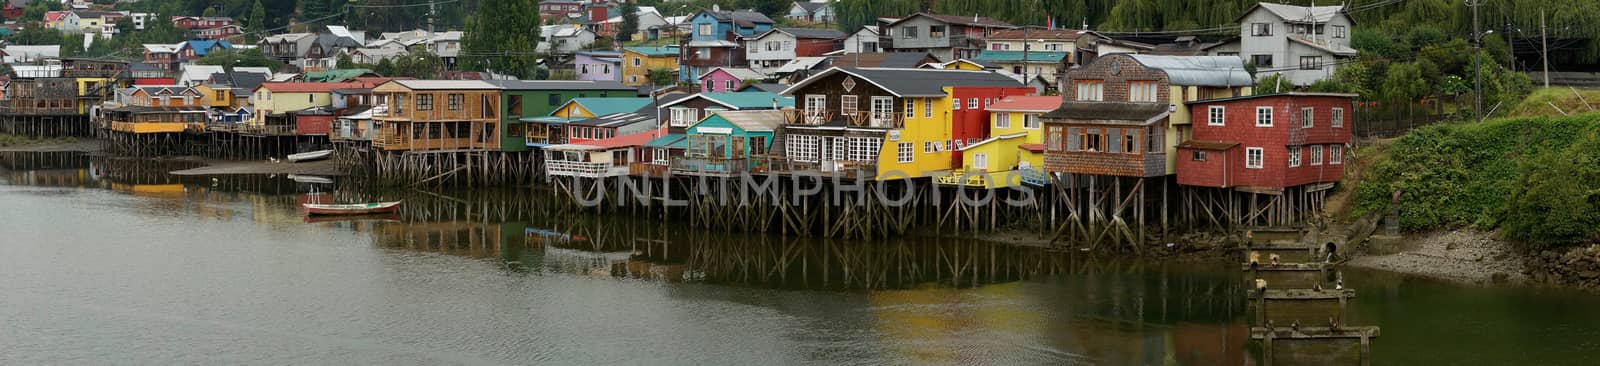 Palafitos. Traditional wooden houses built on stilts along the waters edge in Castro, capital of the Island of Chiloe. These traditional houses are made of wood and usually painted in bright colours.